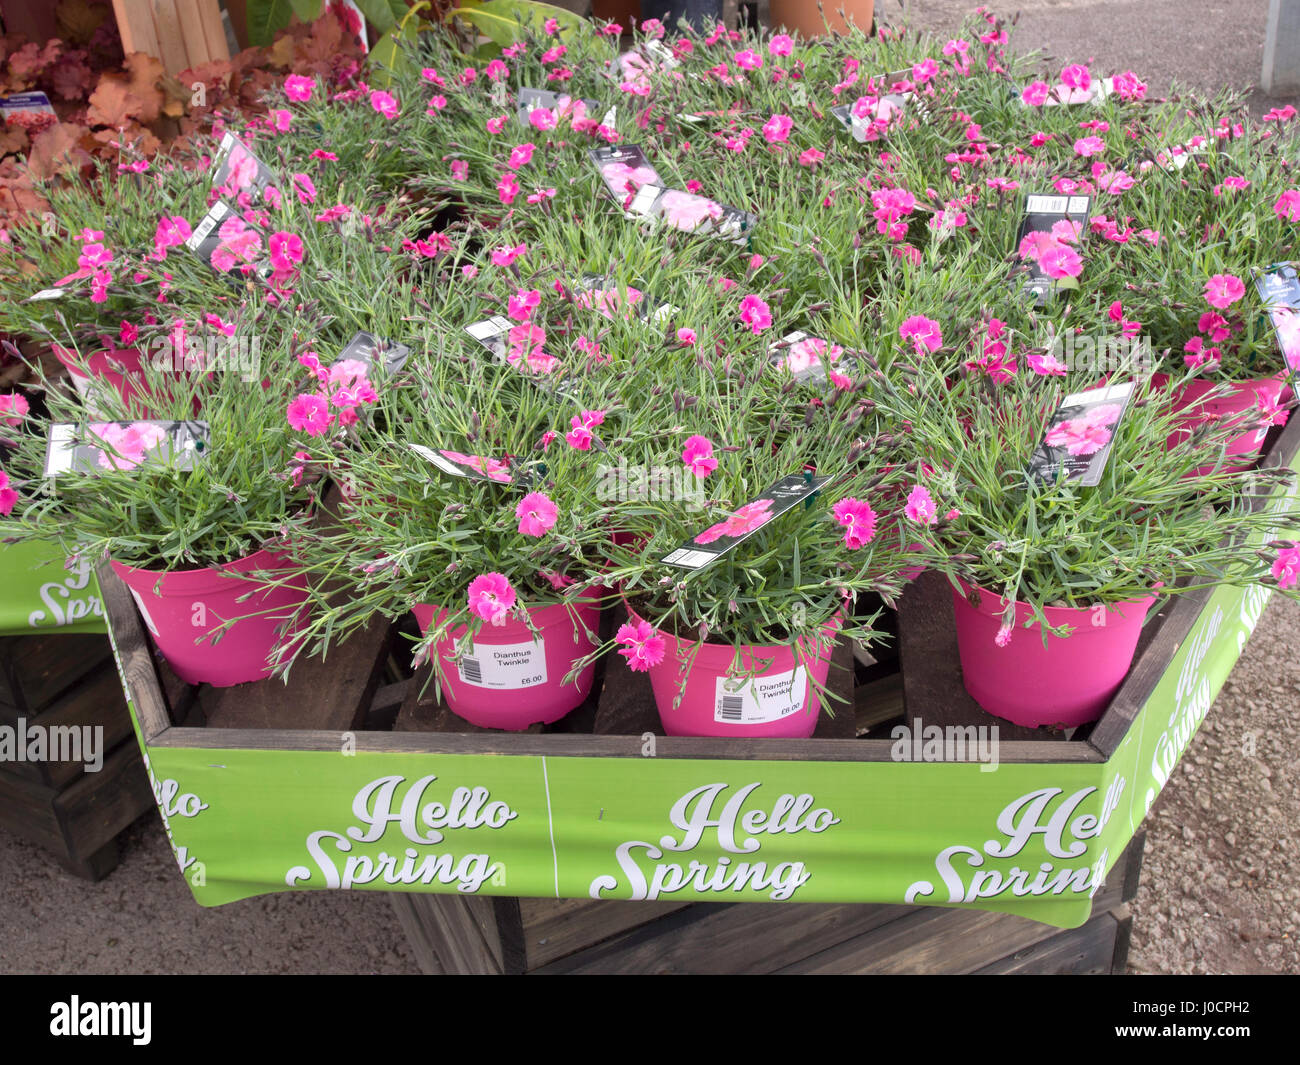 'Hello Spring' a  Garden Centre promotion of plants for sale for Spring planting here  Dianthus caryophyllus 'Twinkle' Stock Photo